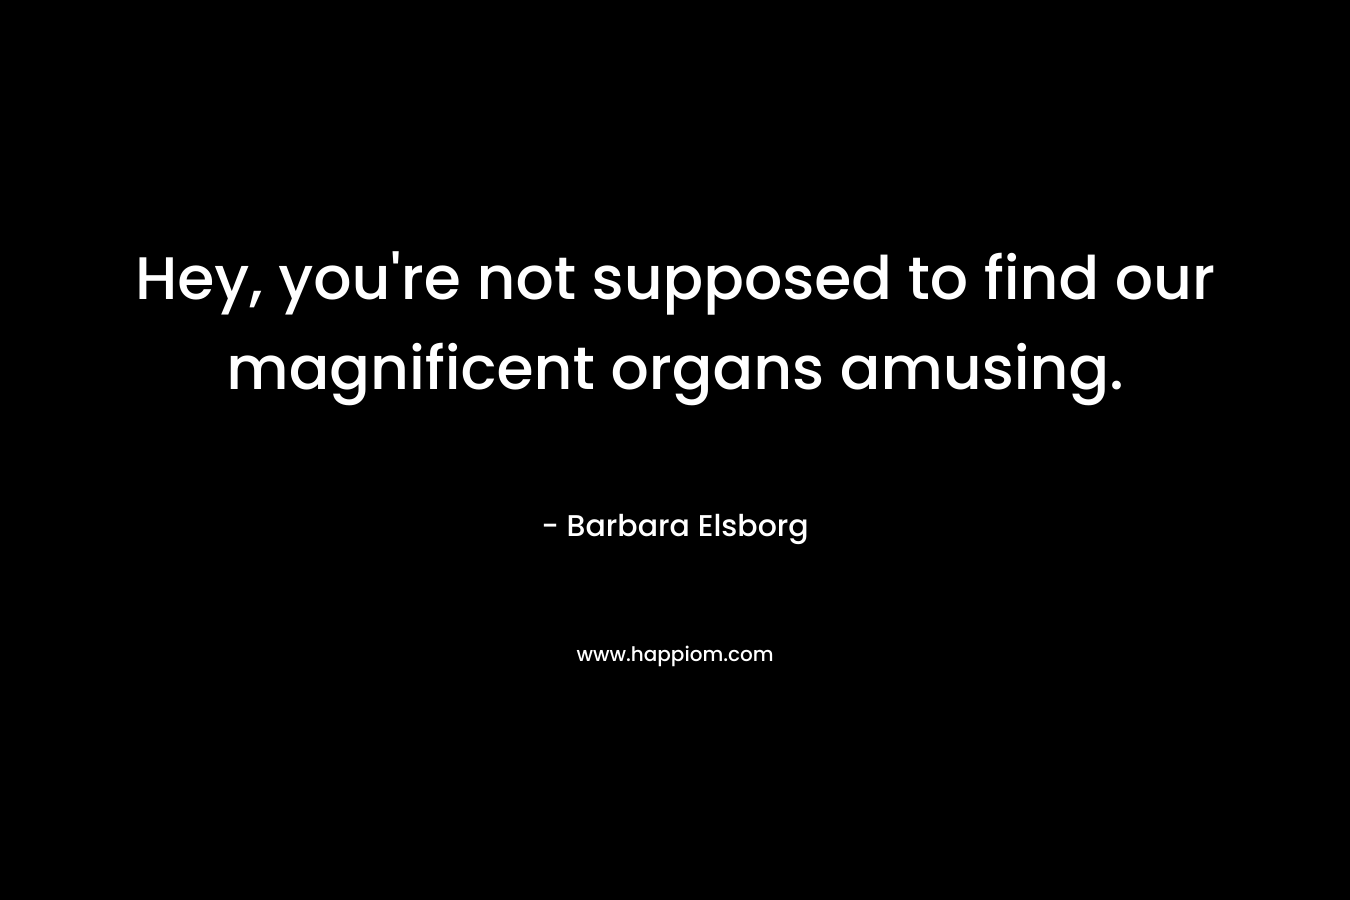 Hey, you’re not supposed to find our magnificent organs amusing. – Barbara Elsborg